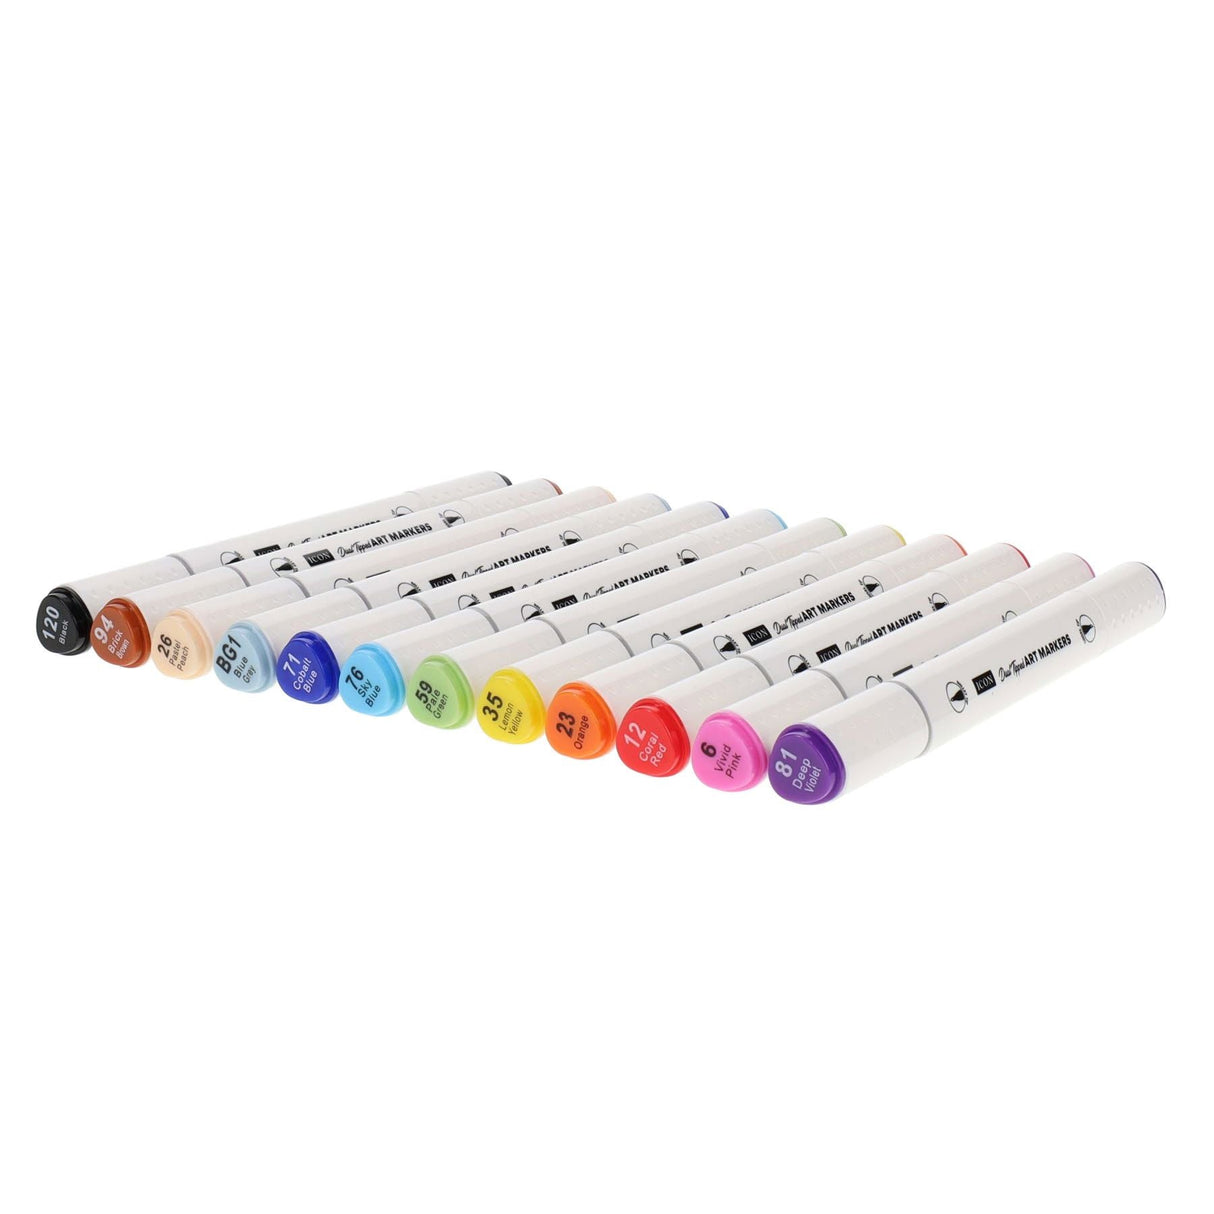 Icon Dual Tip Art Markers - Pack of 12-Markers-Icon|StationeryShop.co.uk